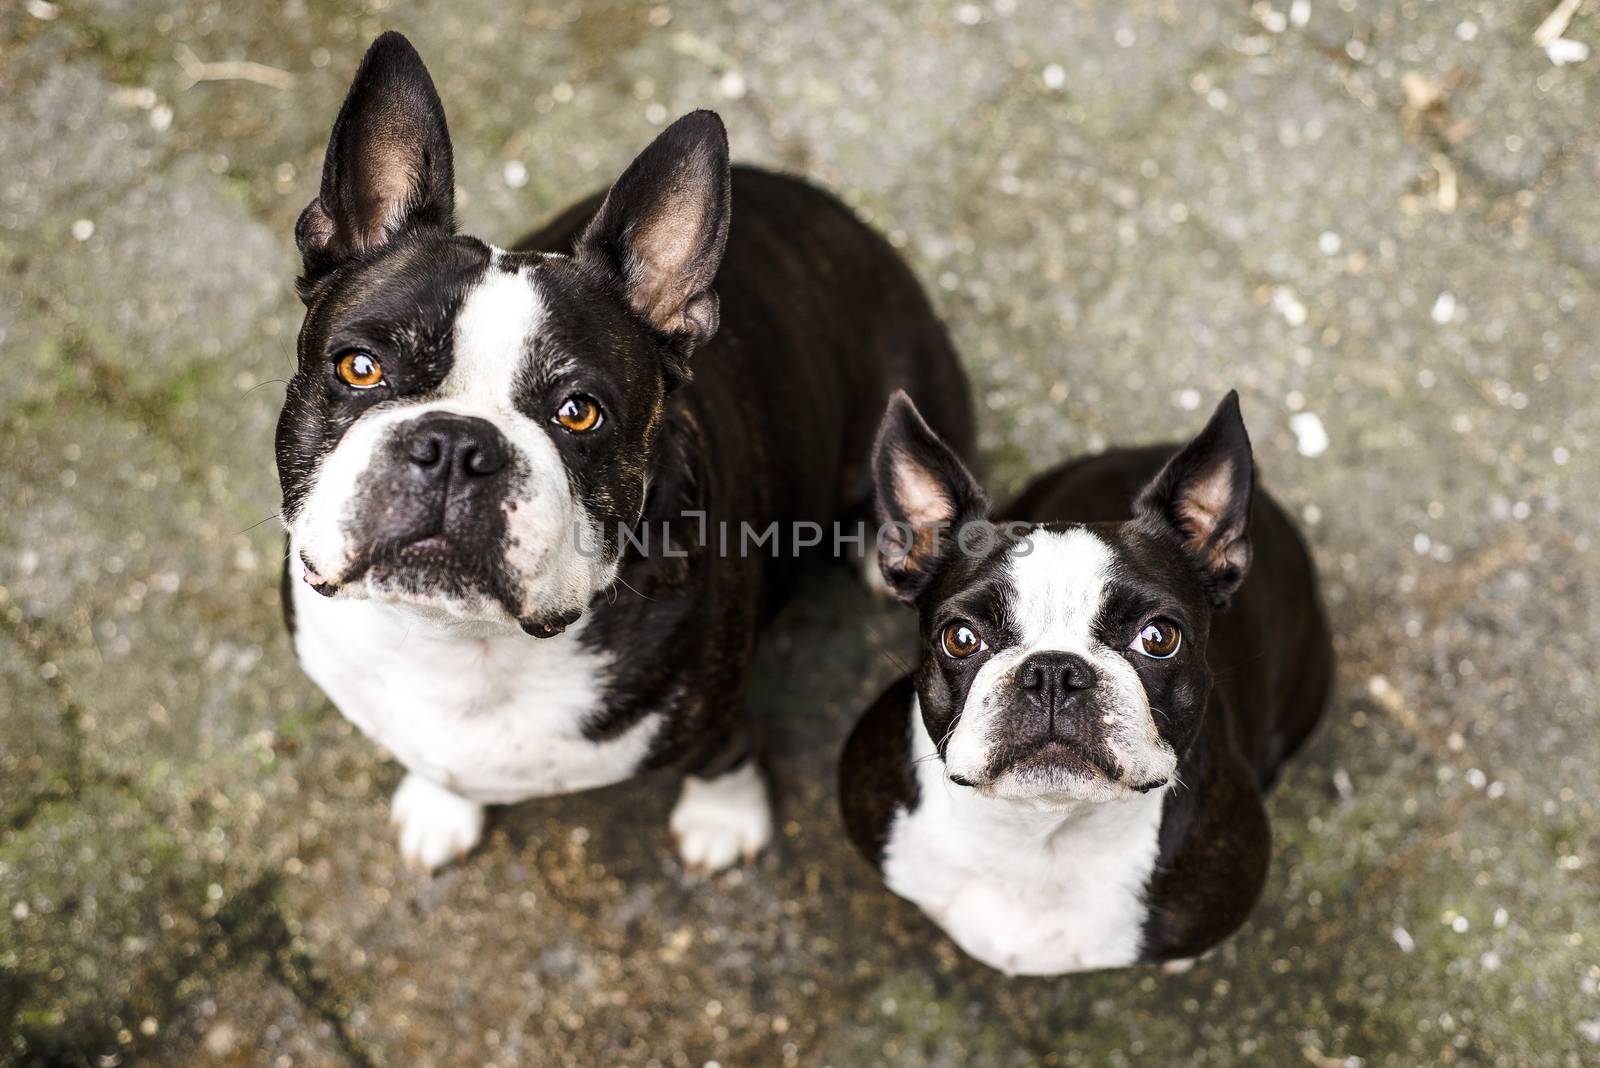 Two Boston Terrier dogs looking up at the camera